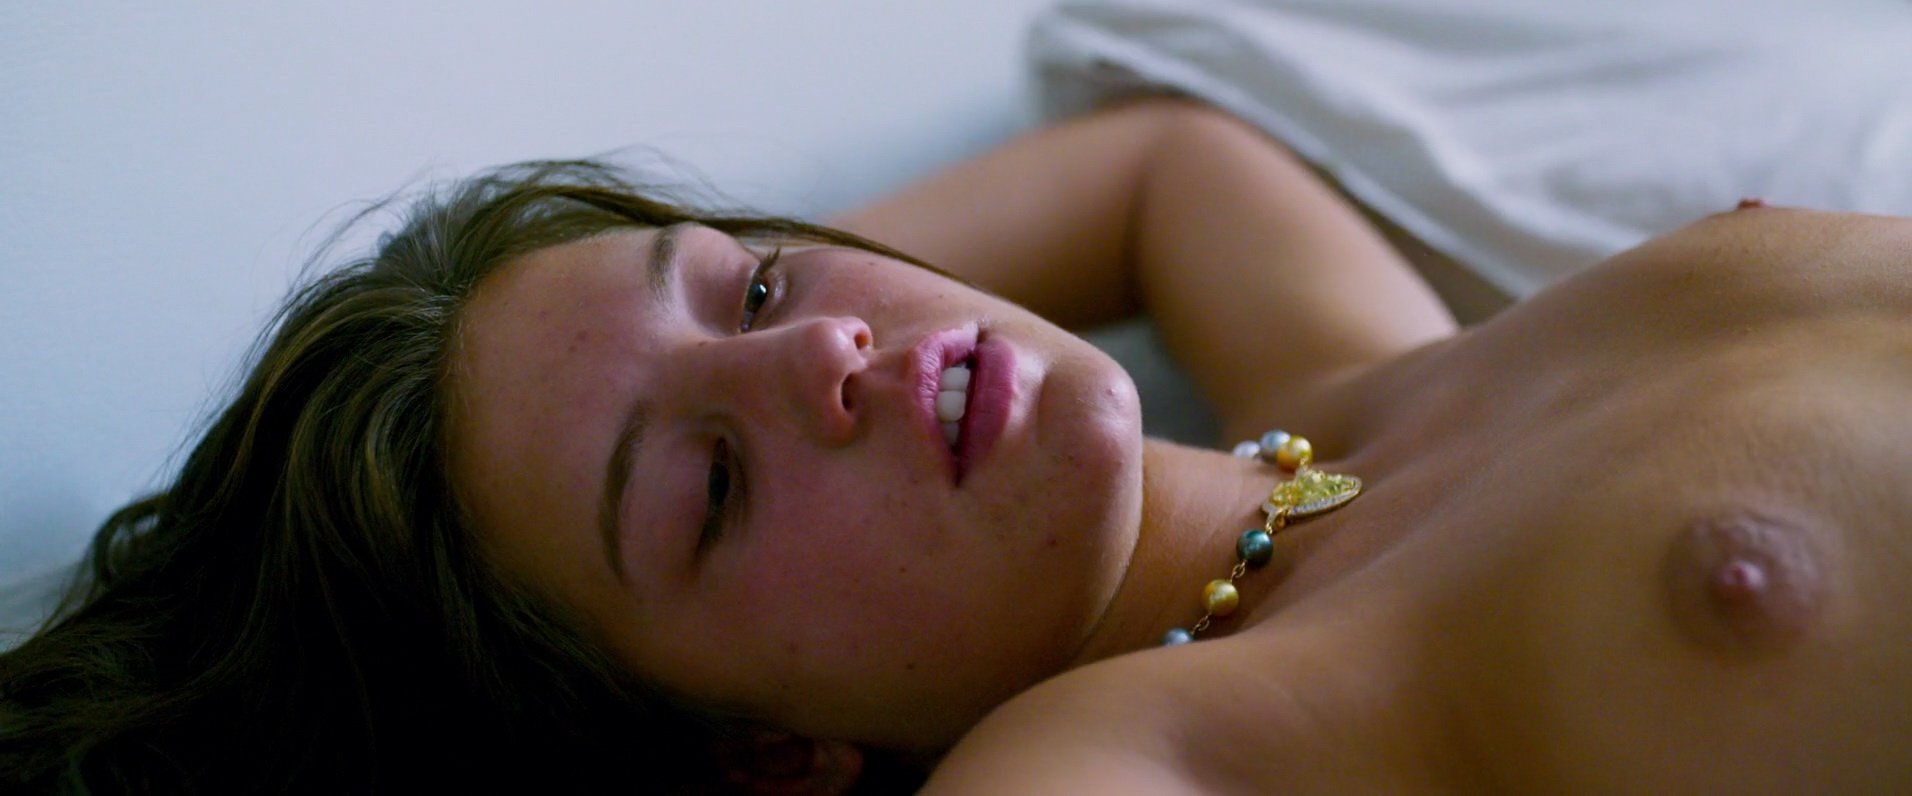 Adele exarchopoulos hot